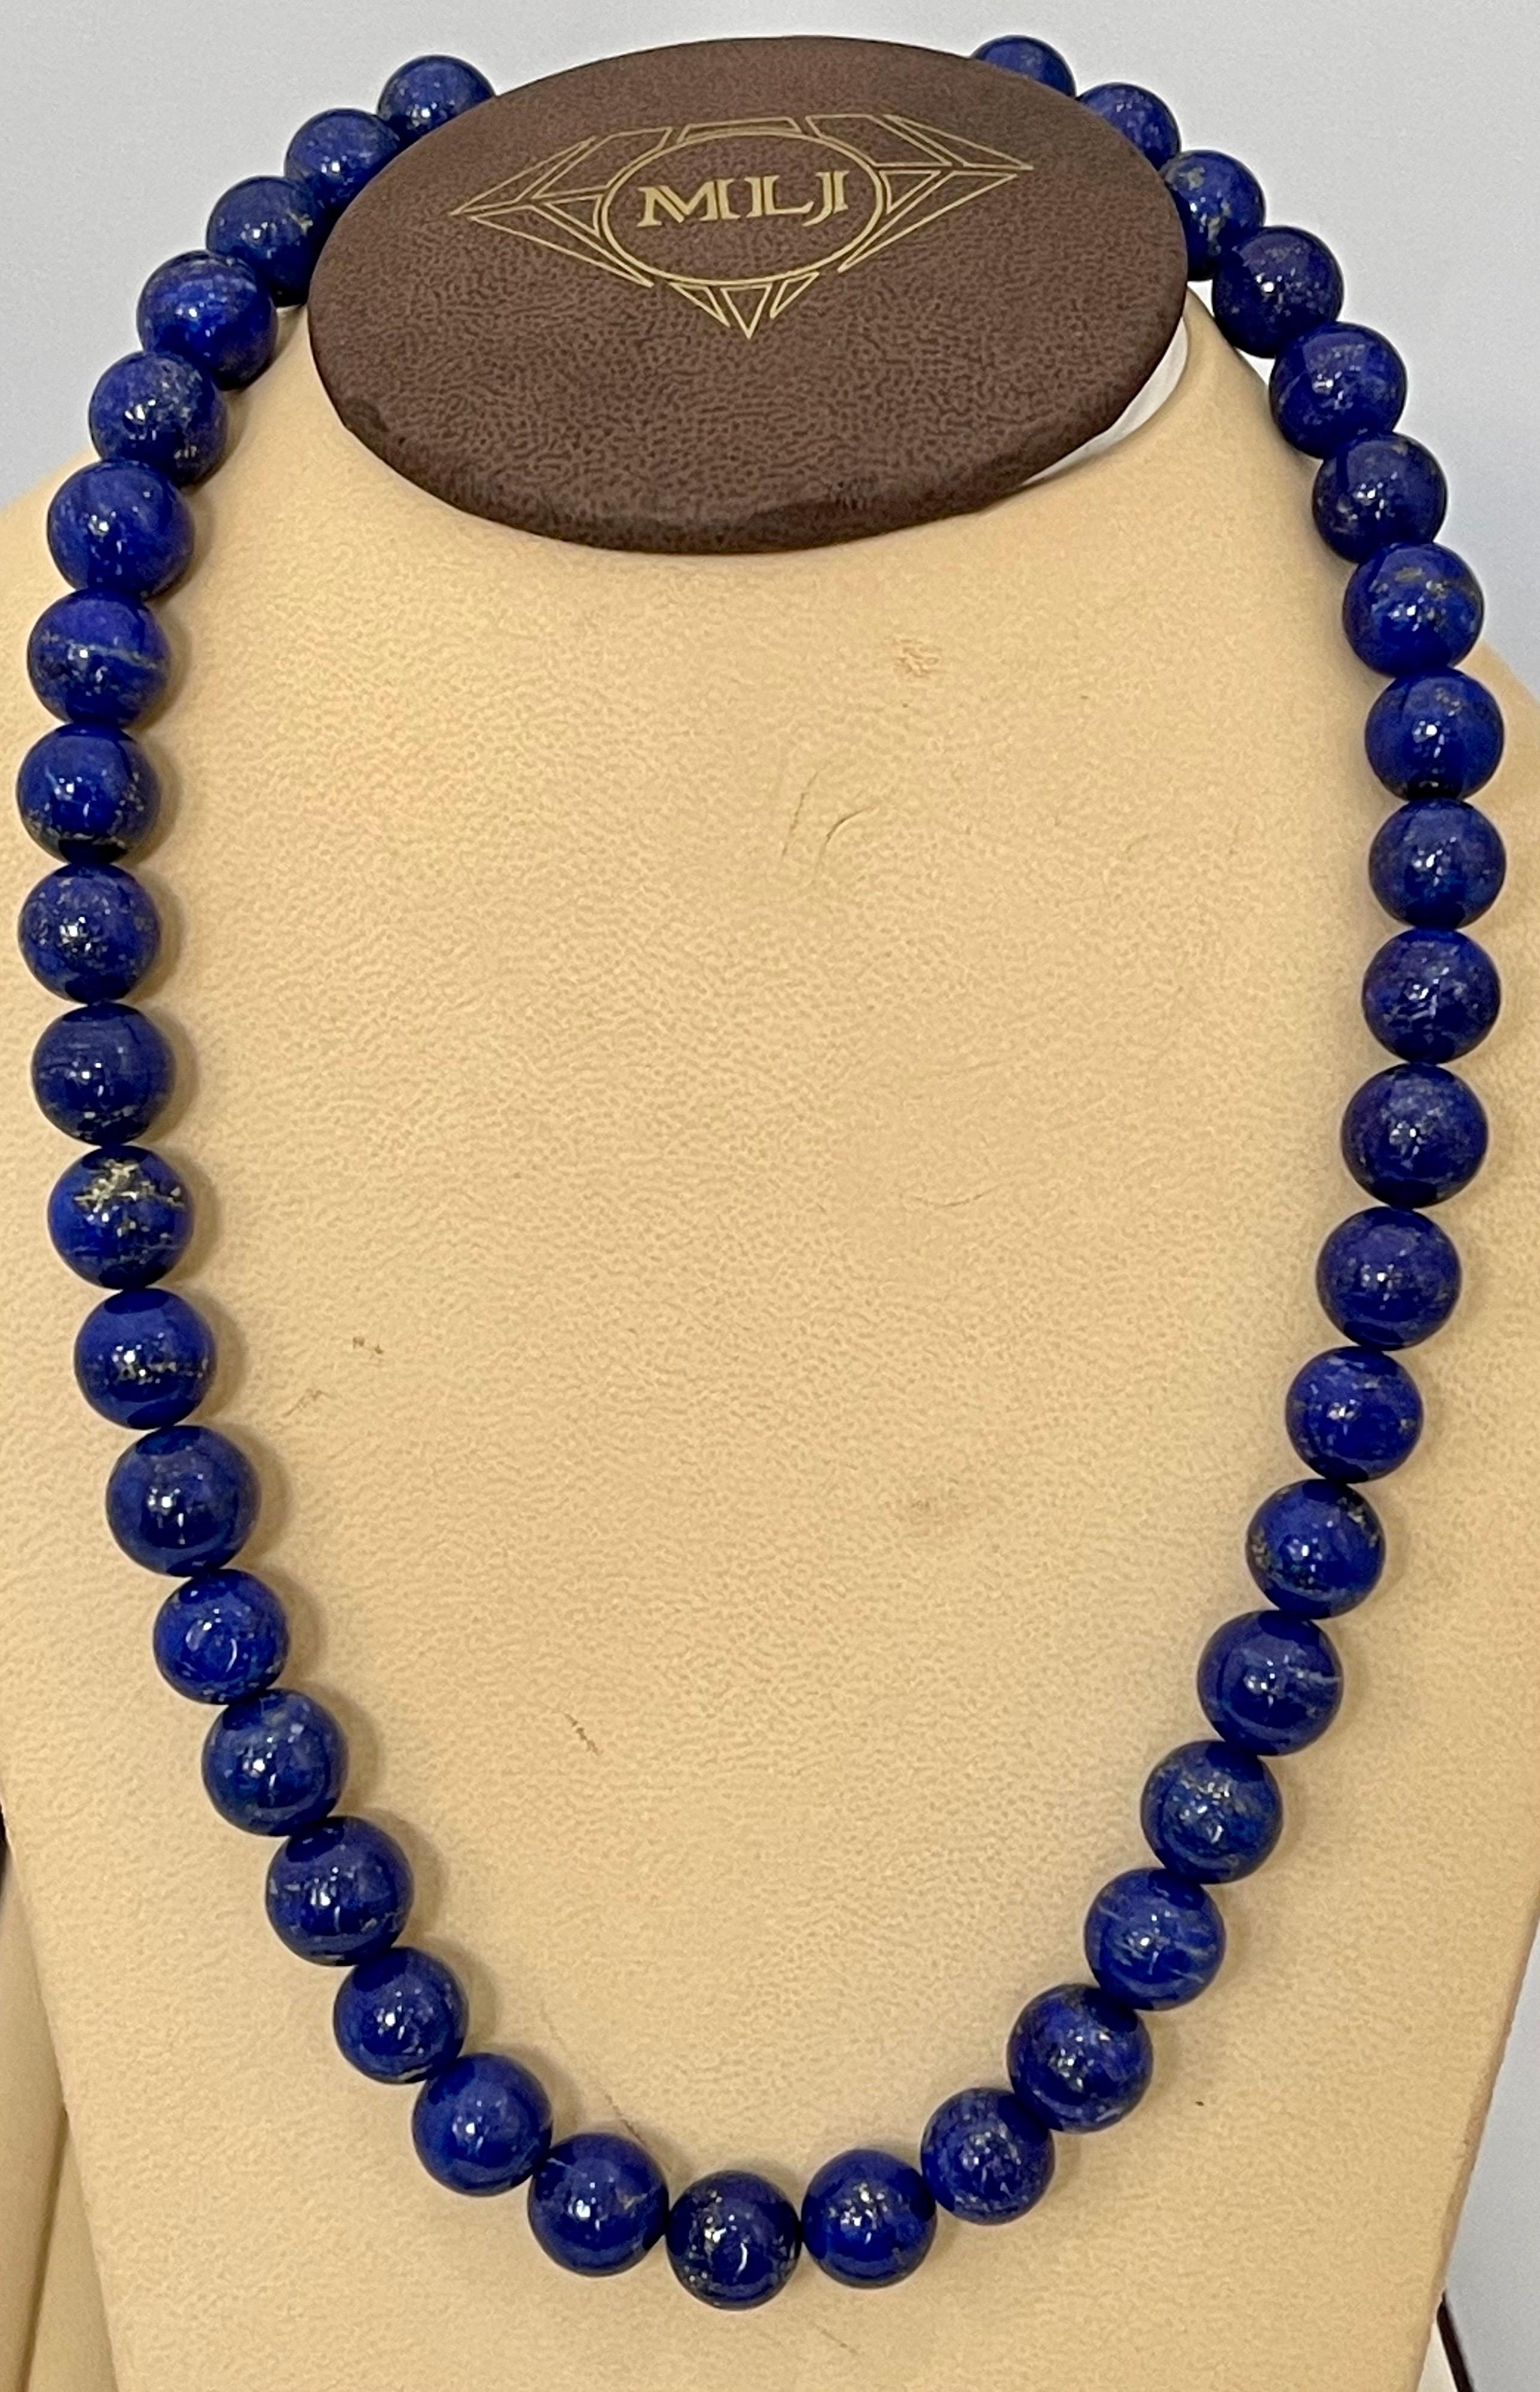 Vintage Lapis Lazuli Single Strand Necklace with 14 Karat Yellow Gold Lobster For Sale 5